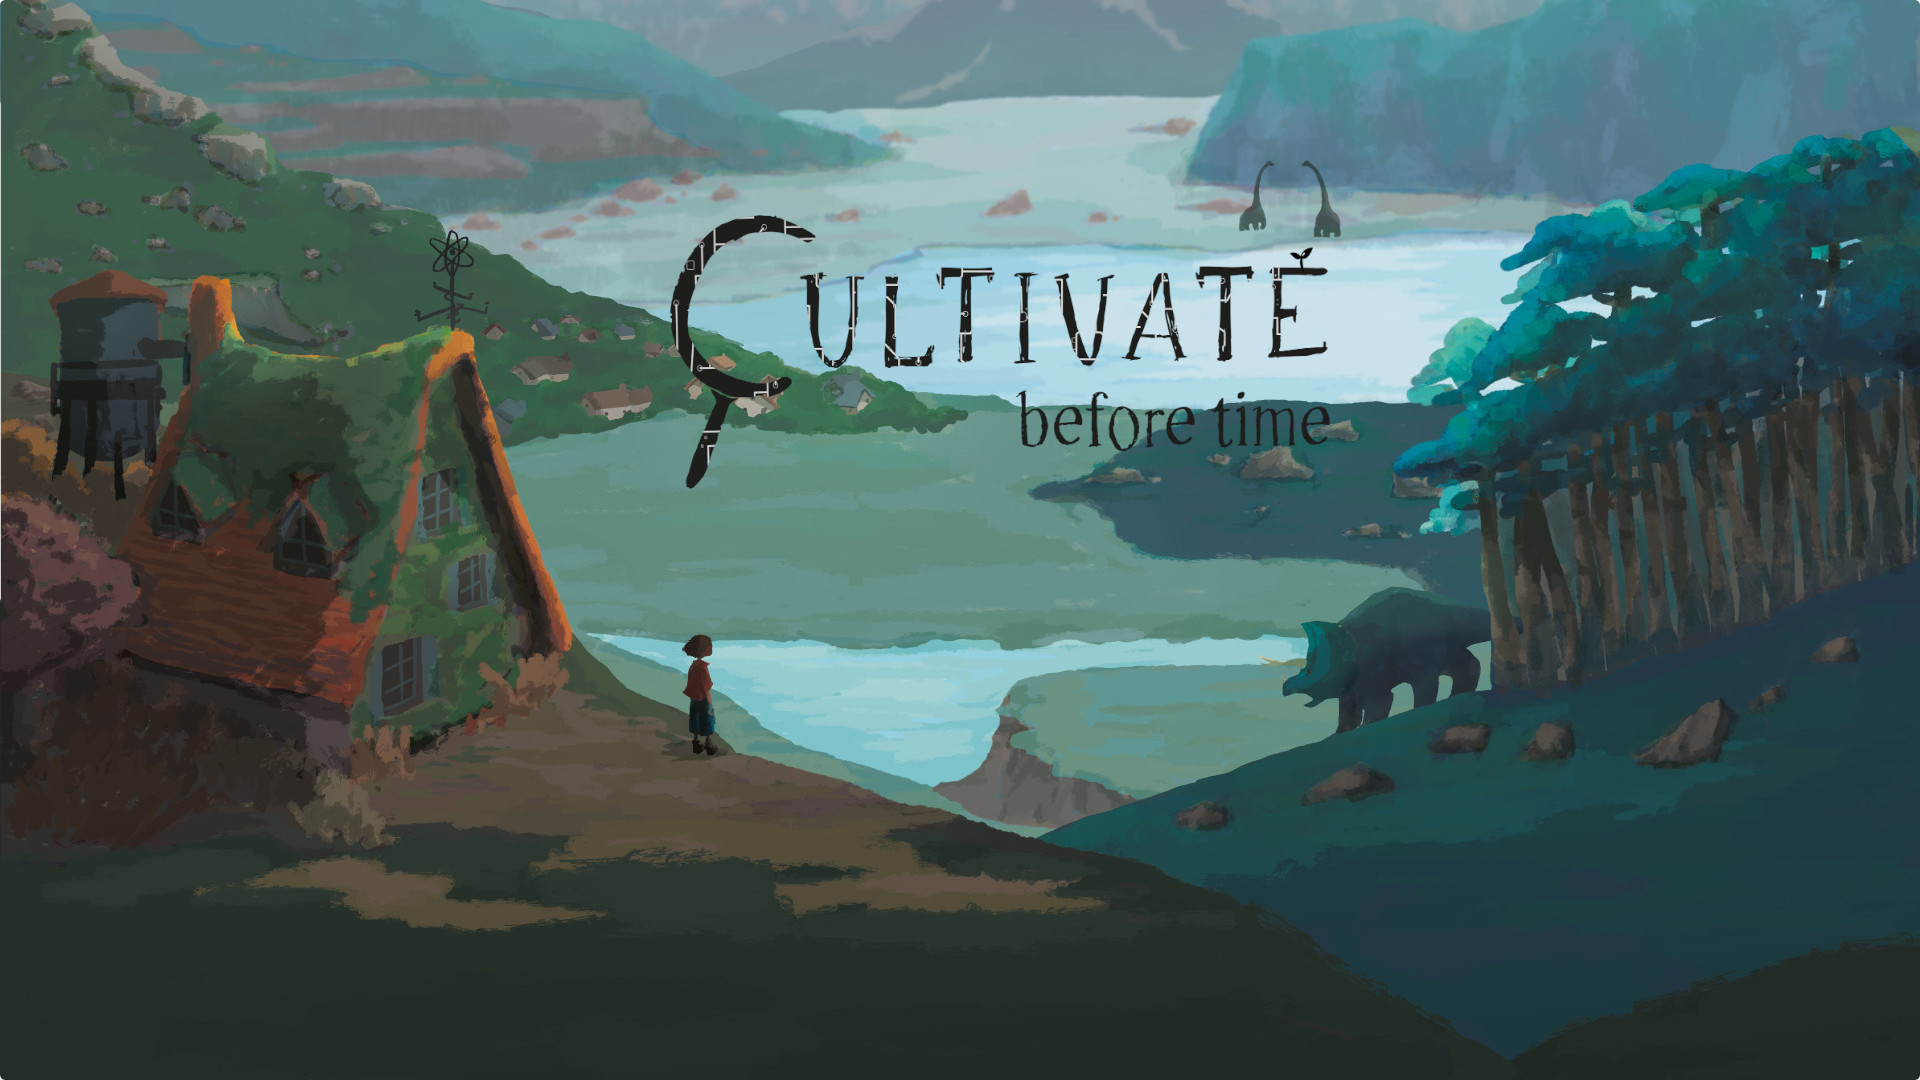 Responsive Cultivate title